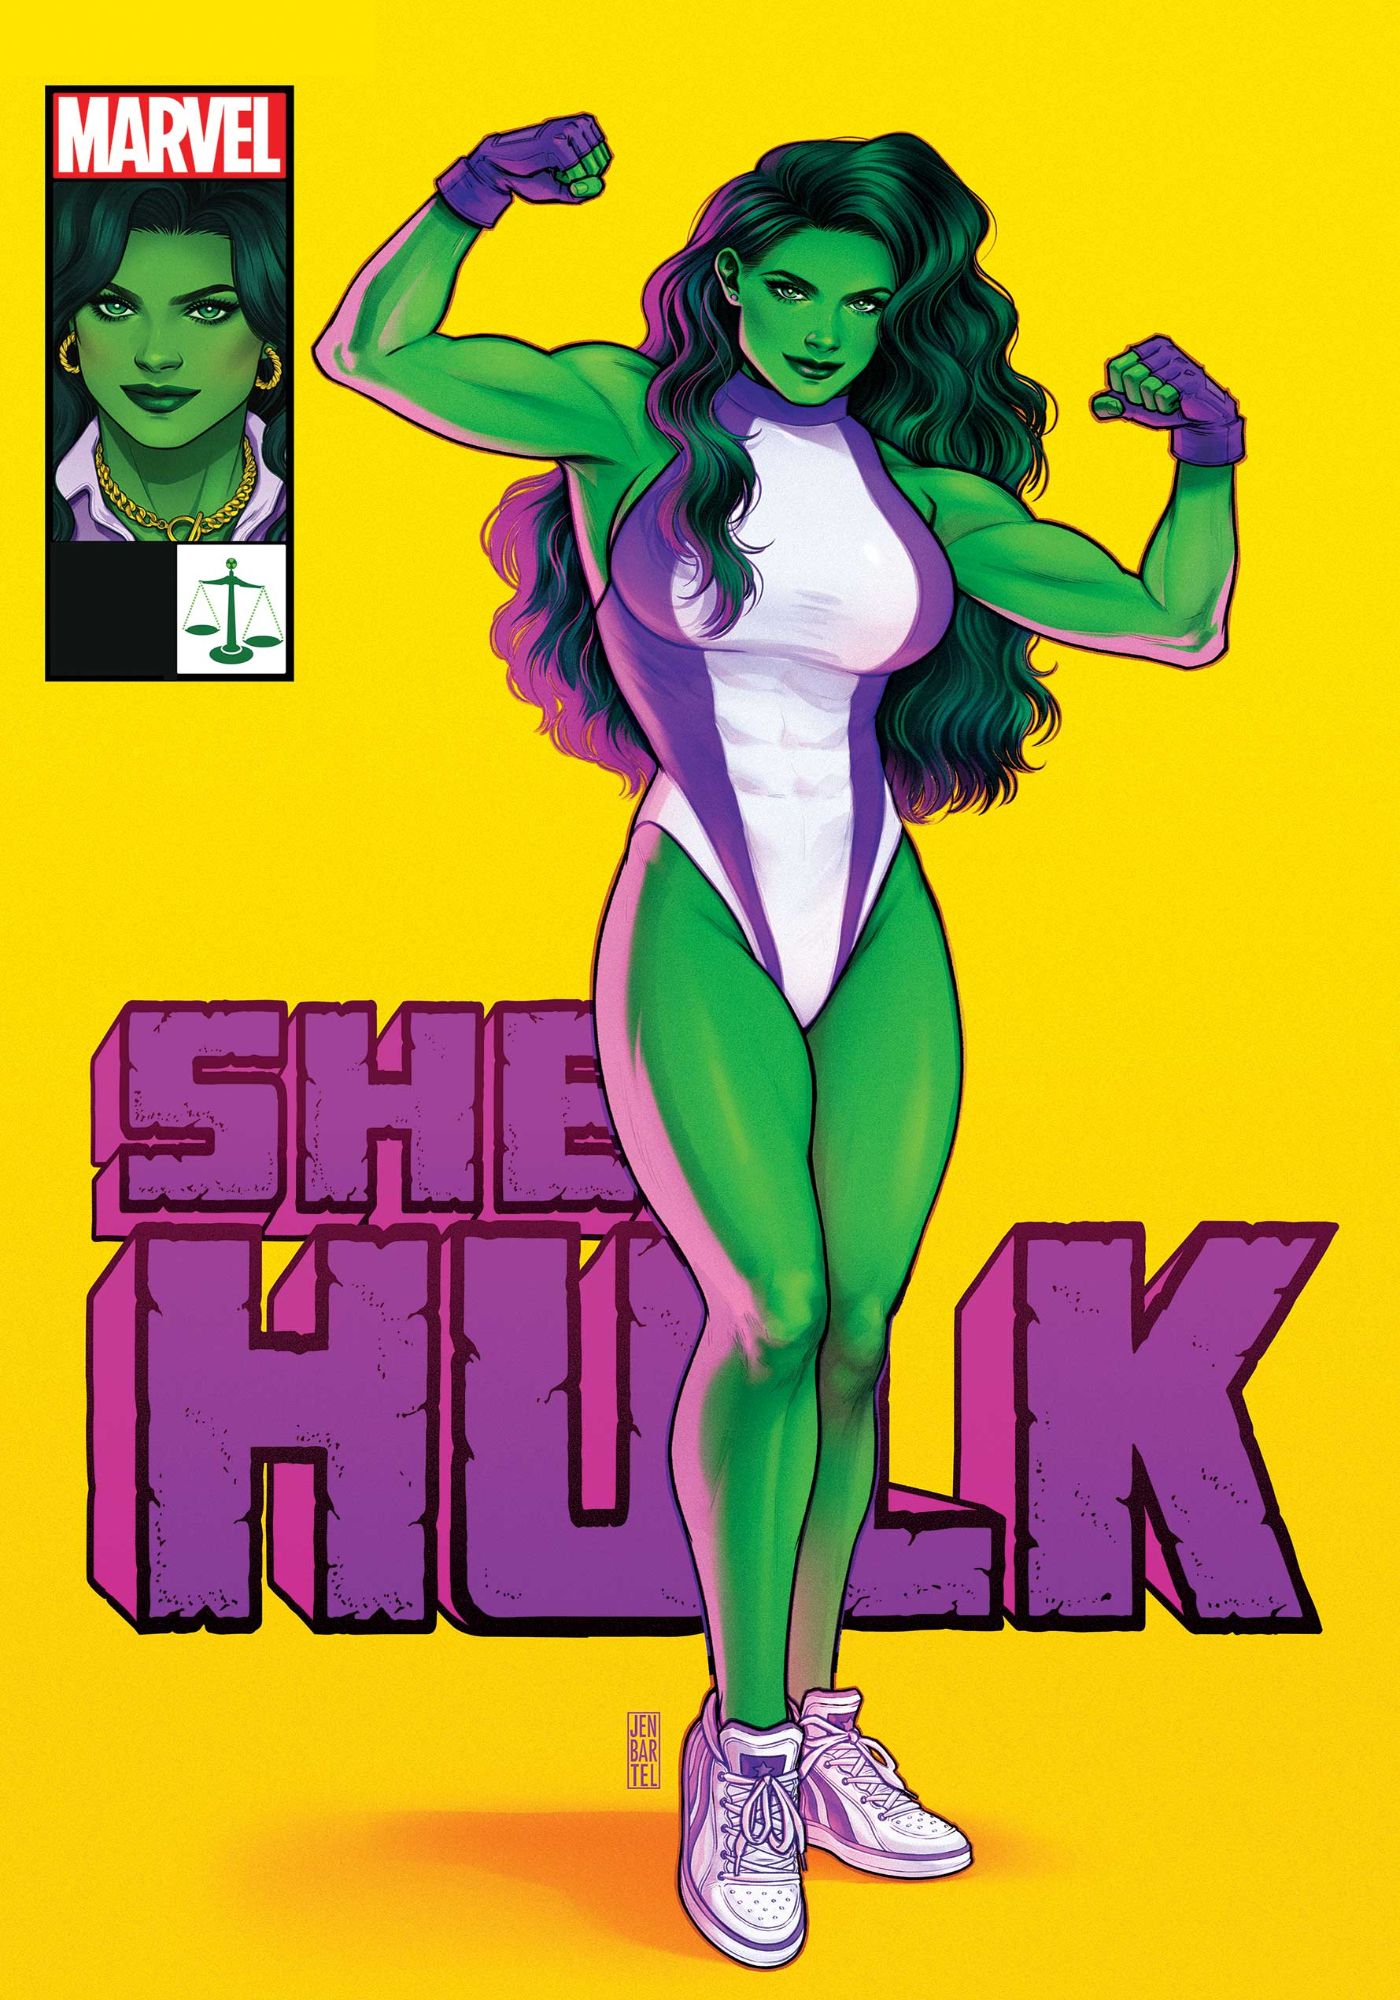 Marvel Brings Back Classic SheHulk in First Look at New Series